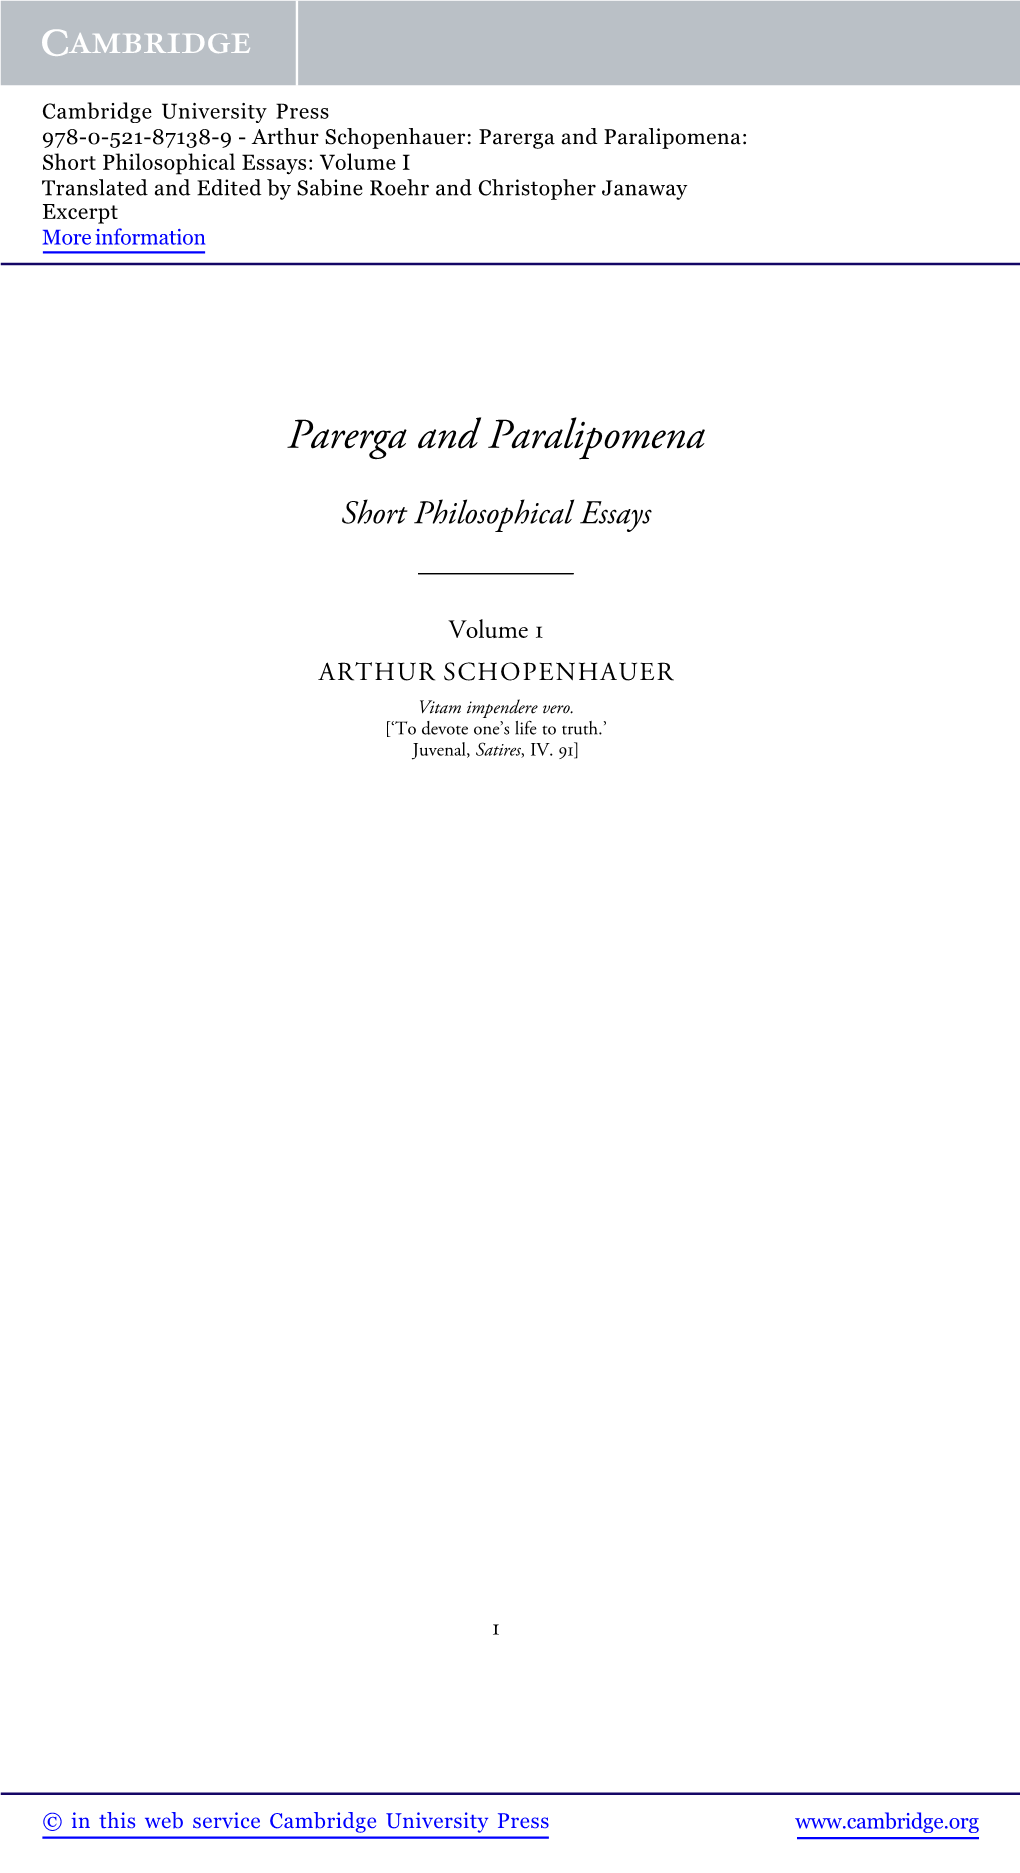 Parerga and Paralipomena: Short Philosophical Essays: Volume I Translated and Edited by Sabine Roehr and Christopher Janaway Excerpt More Information